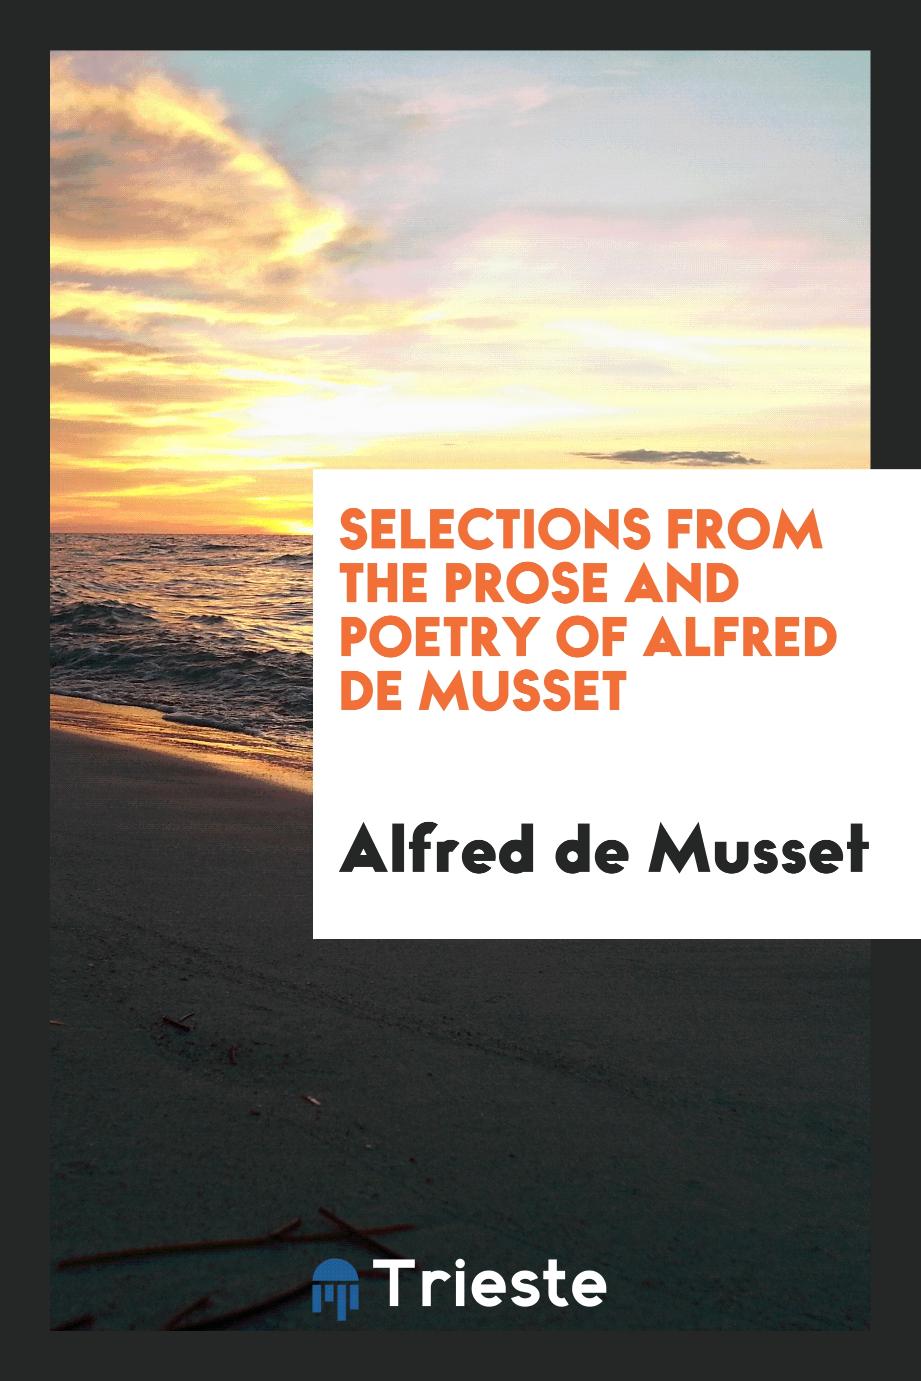 Selections from the prose and poetry of Alfred de Musset